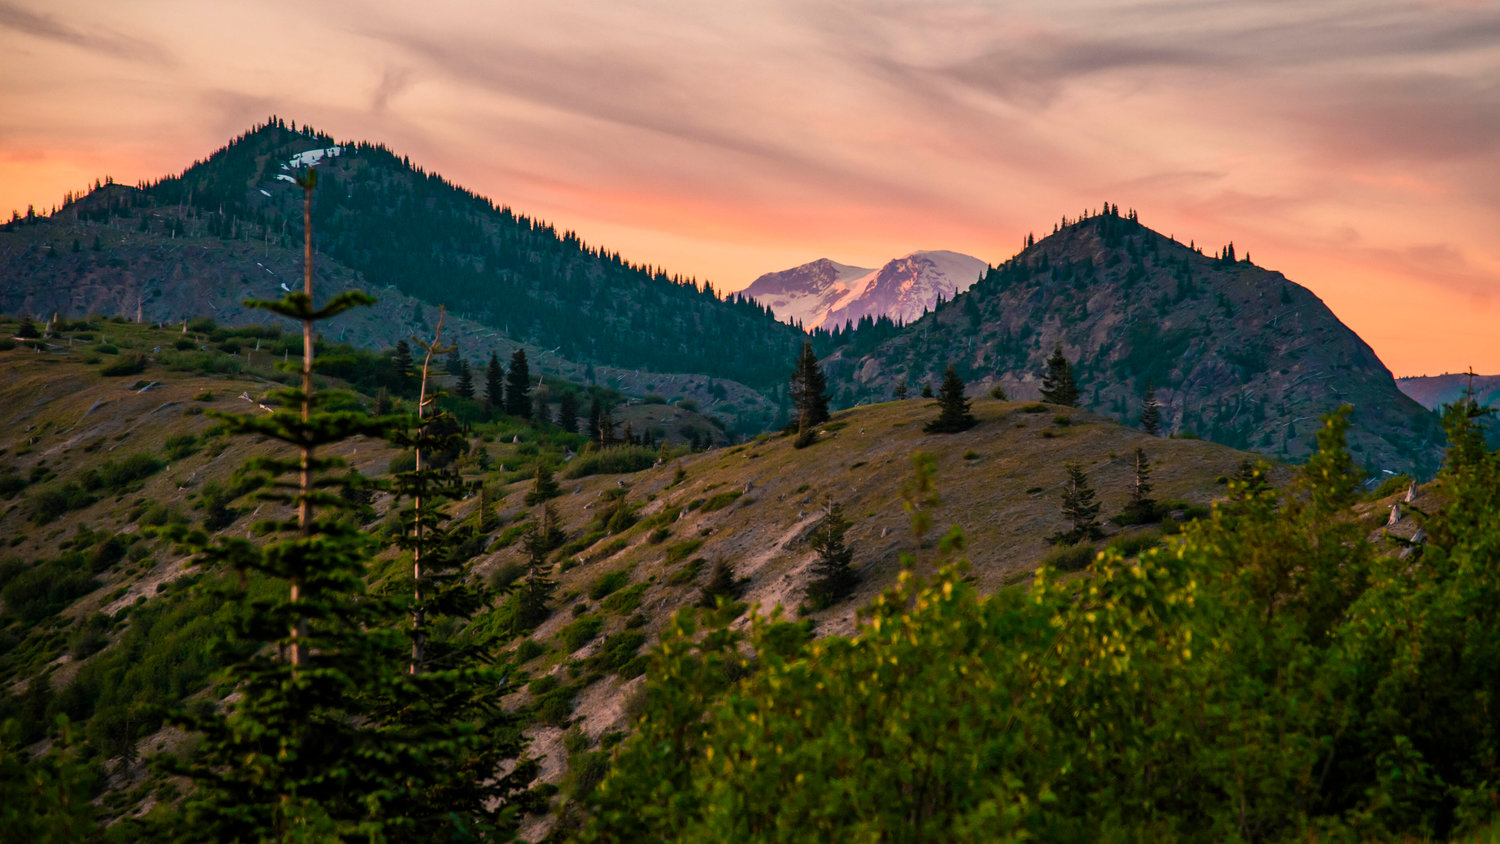 Mount Rainier peaks over hills at sunset seen from the Gifford Pinchot National Forest on Thursday.